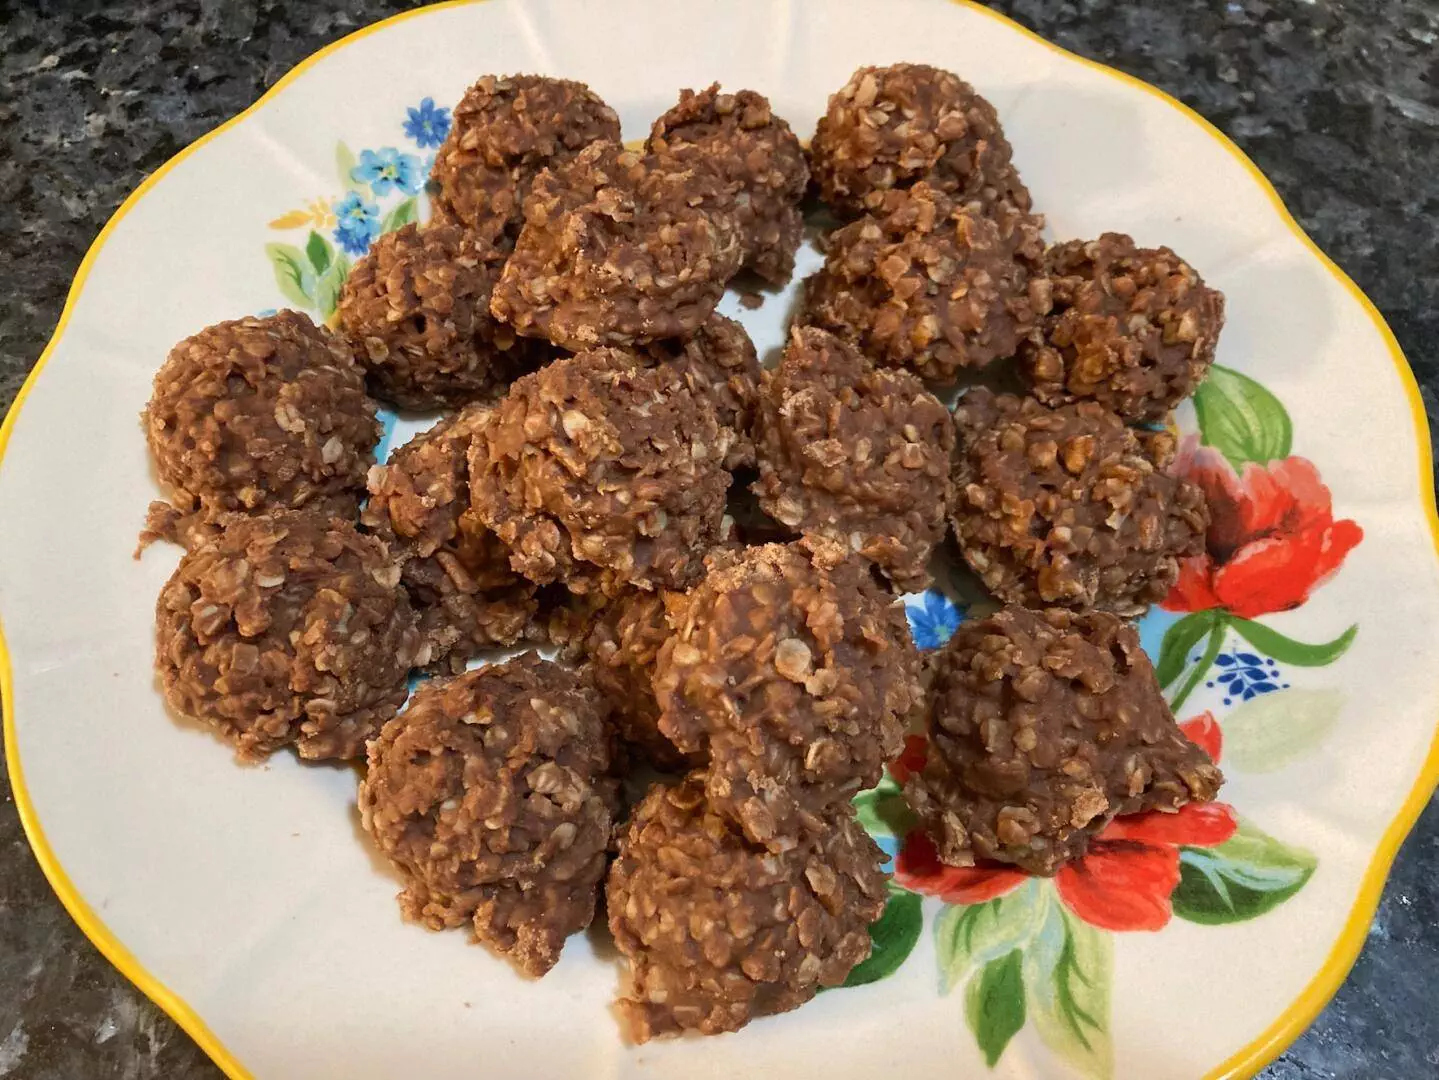 No-Bake Chocolate Oatmeal Cookies from Out of the Box Baking.com